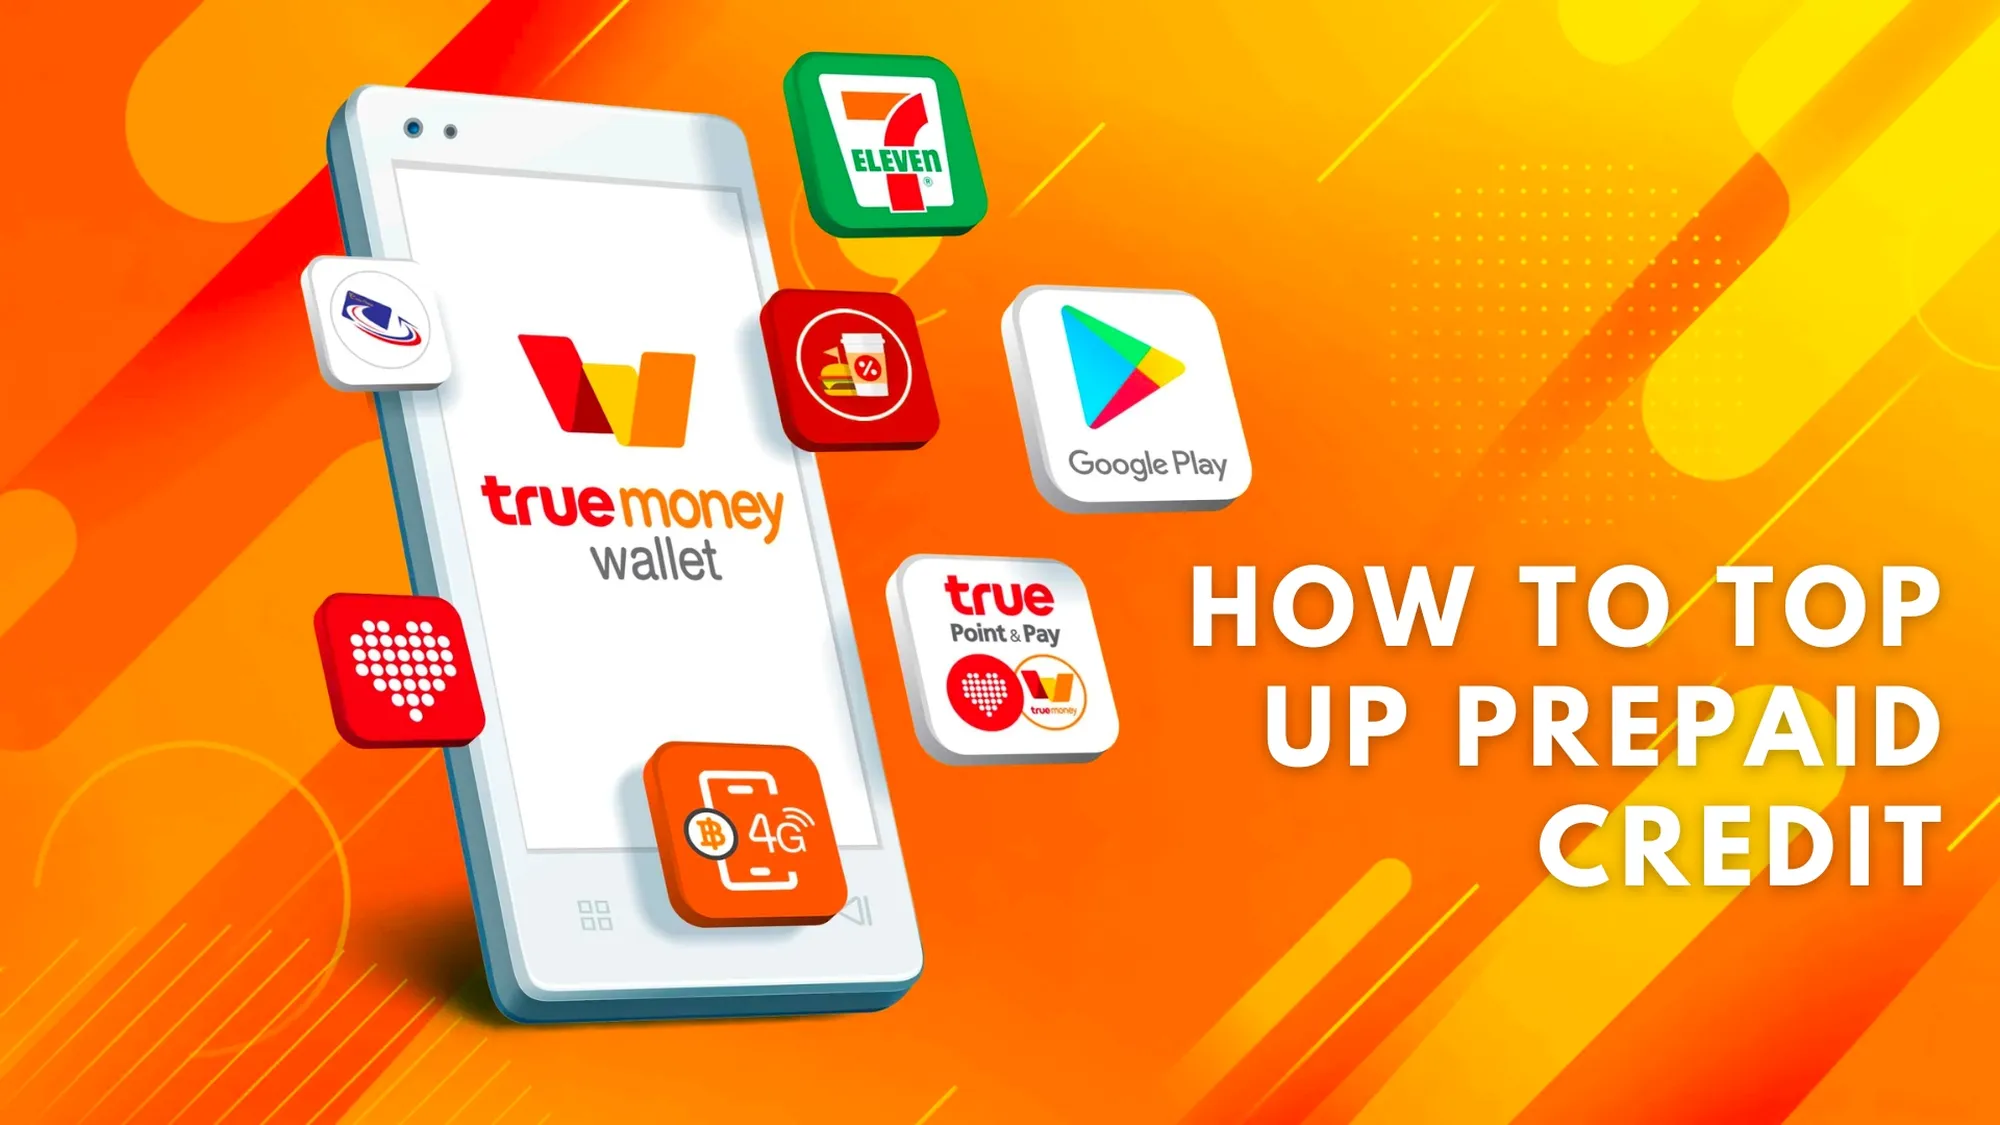 how to top up prepaid credit using the truemoney wallet app